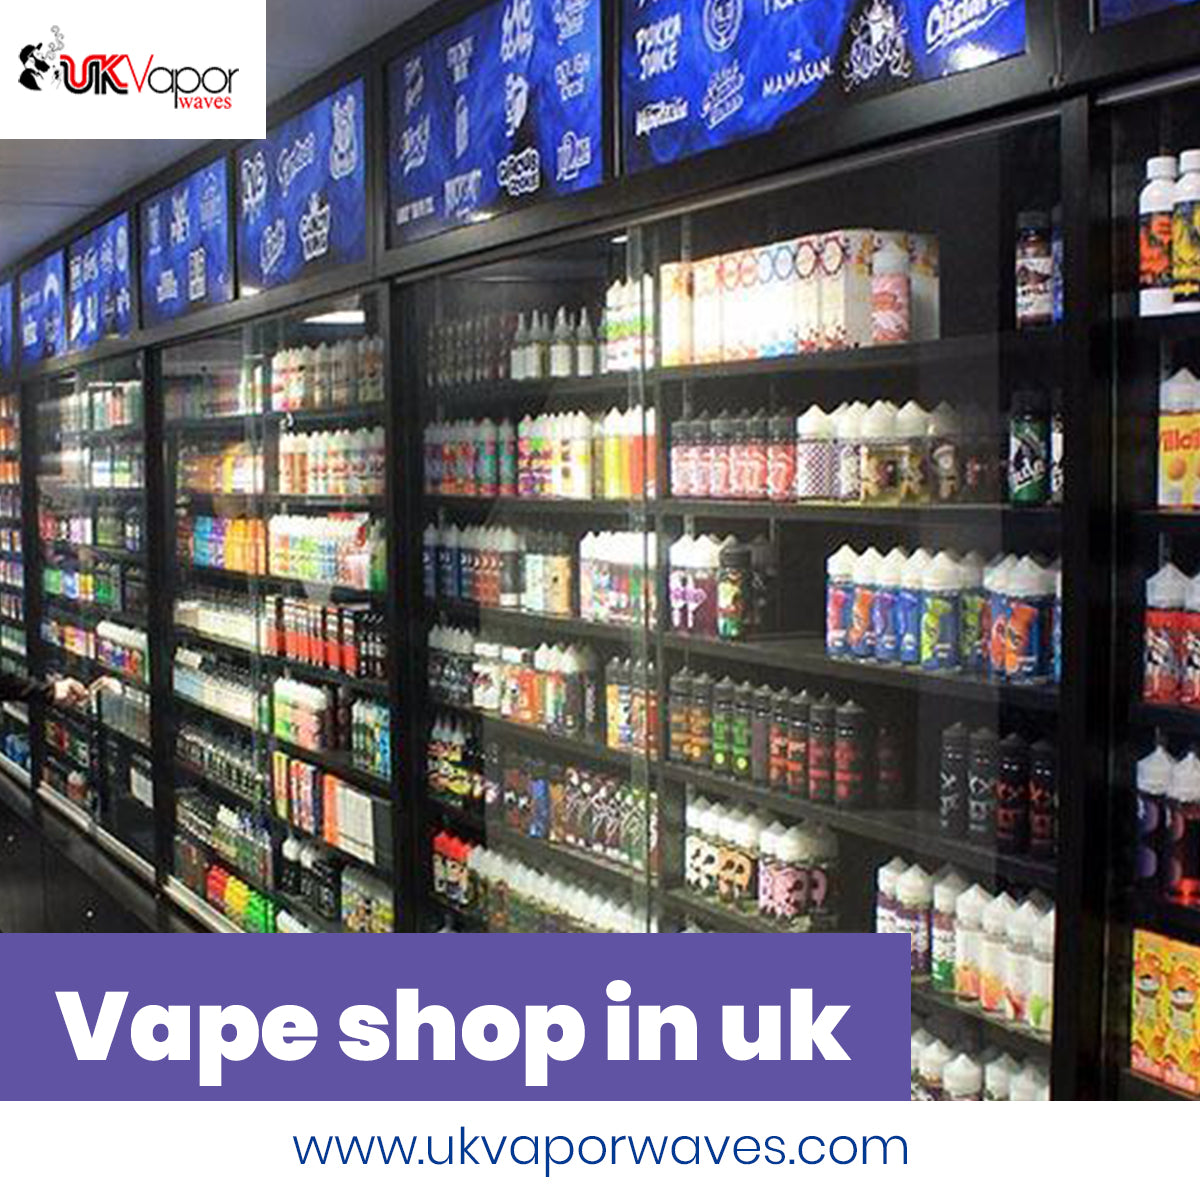 Vape Shopping and Kit for Affordable Prices